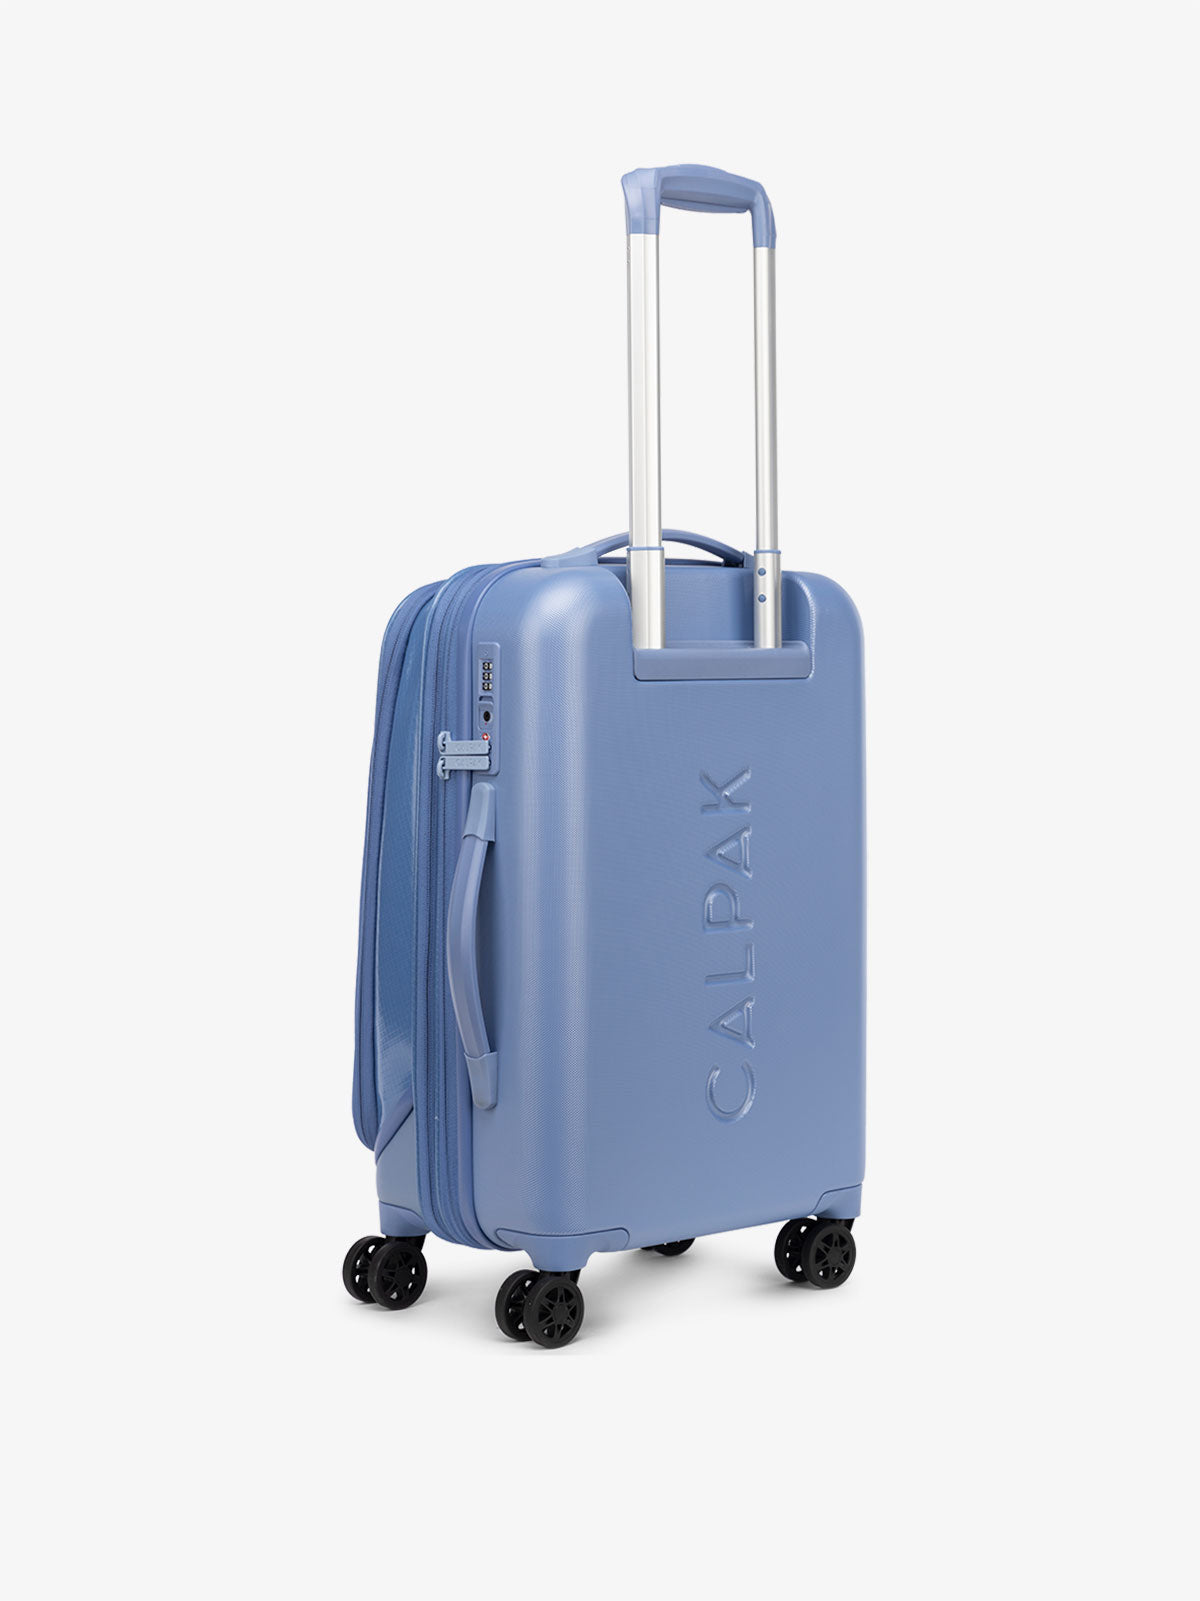 CALPAK Terra Carry-On Luggage back hard shell with grab handles and 360 spinner wheels in glacier